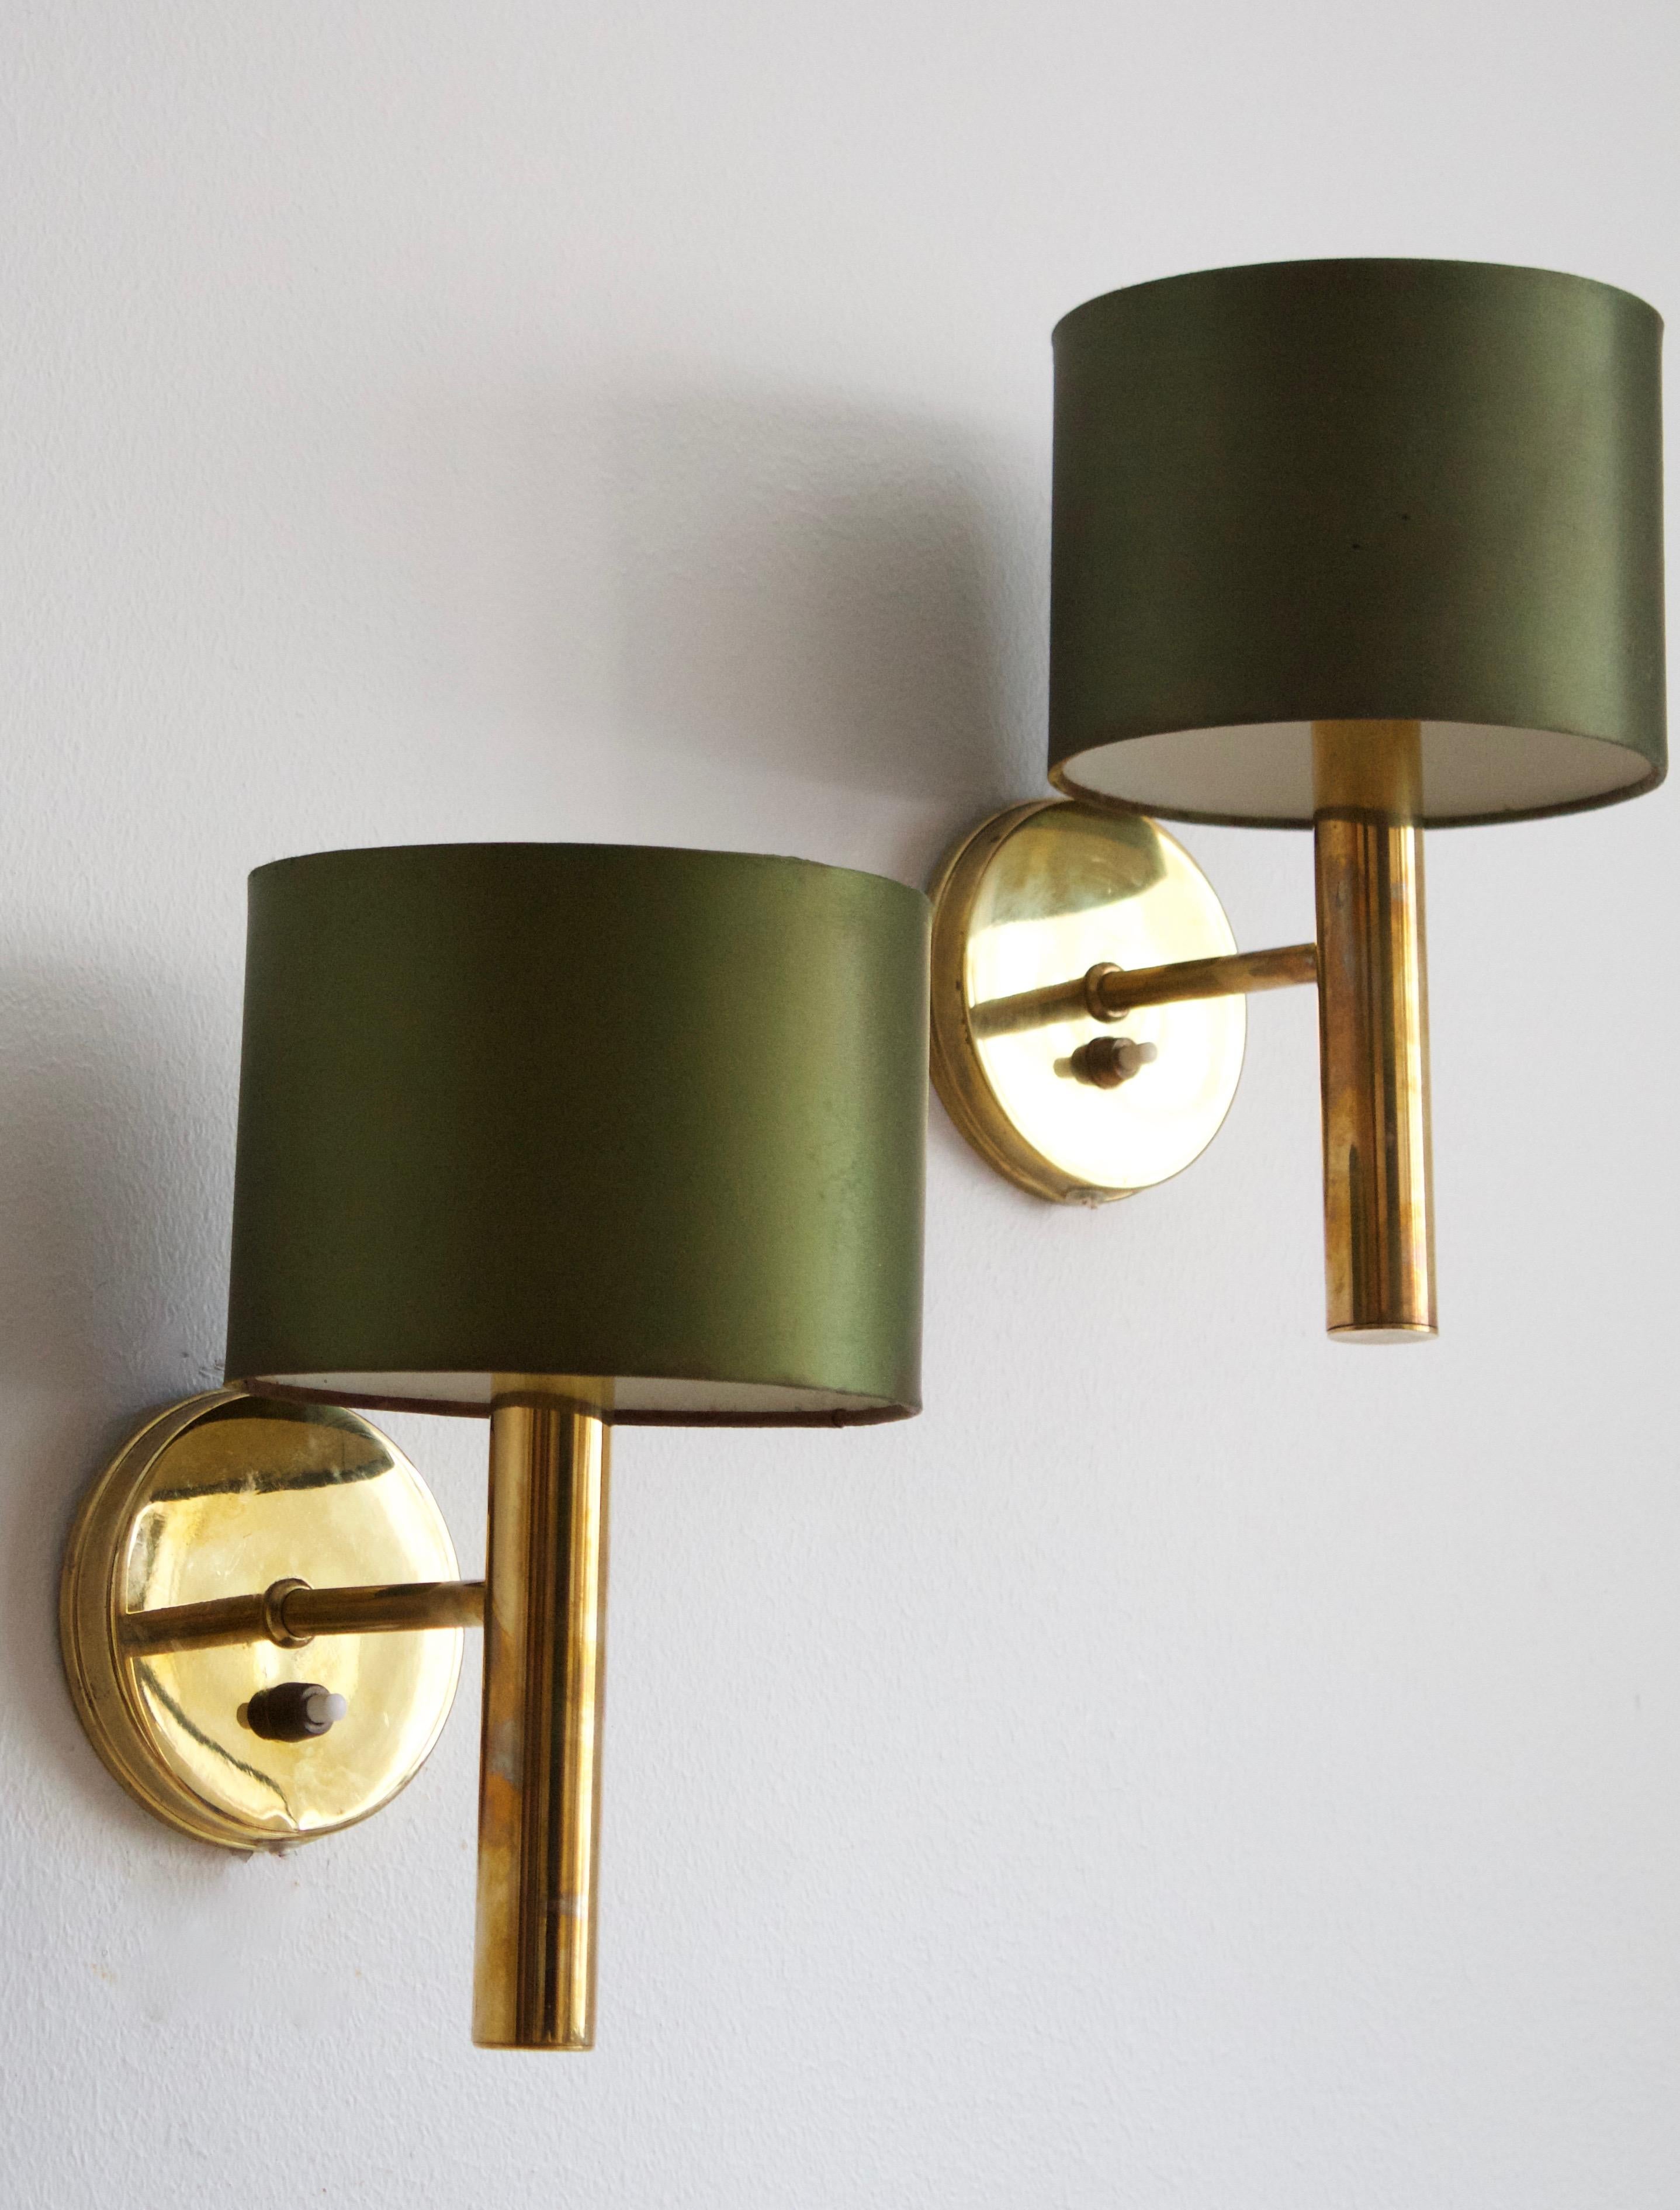 A pair of wall lights or sconces designed by S.O.A. Mejlstrøm, for MS Belysning, Denmark, 1960s. In brass, with its original green velvet lampshades. Labeled.